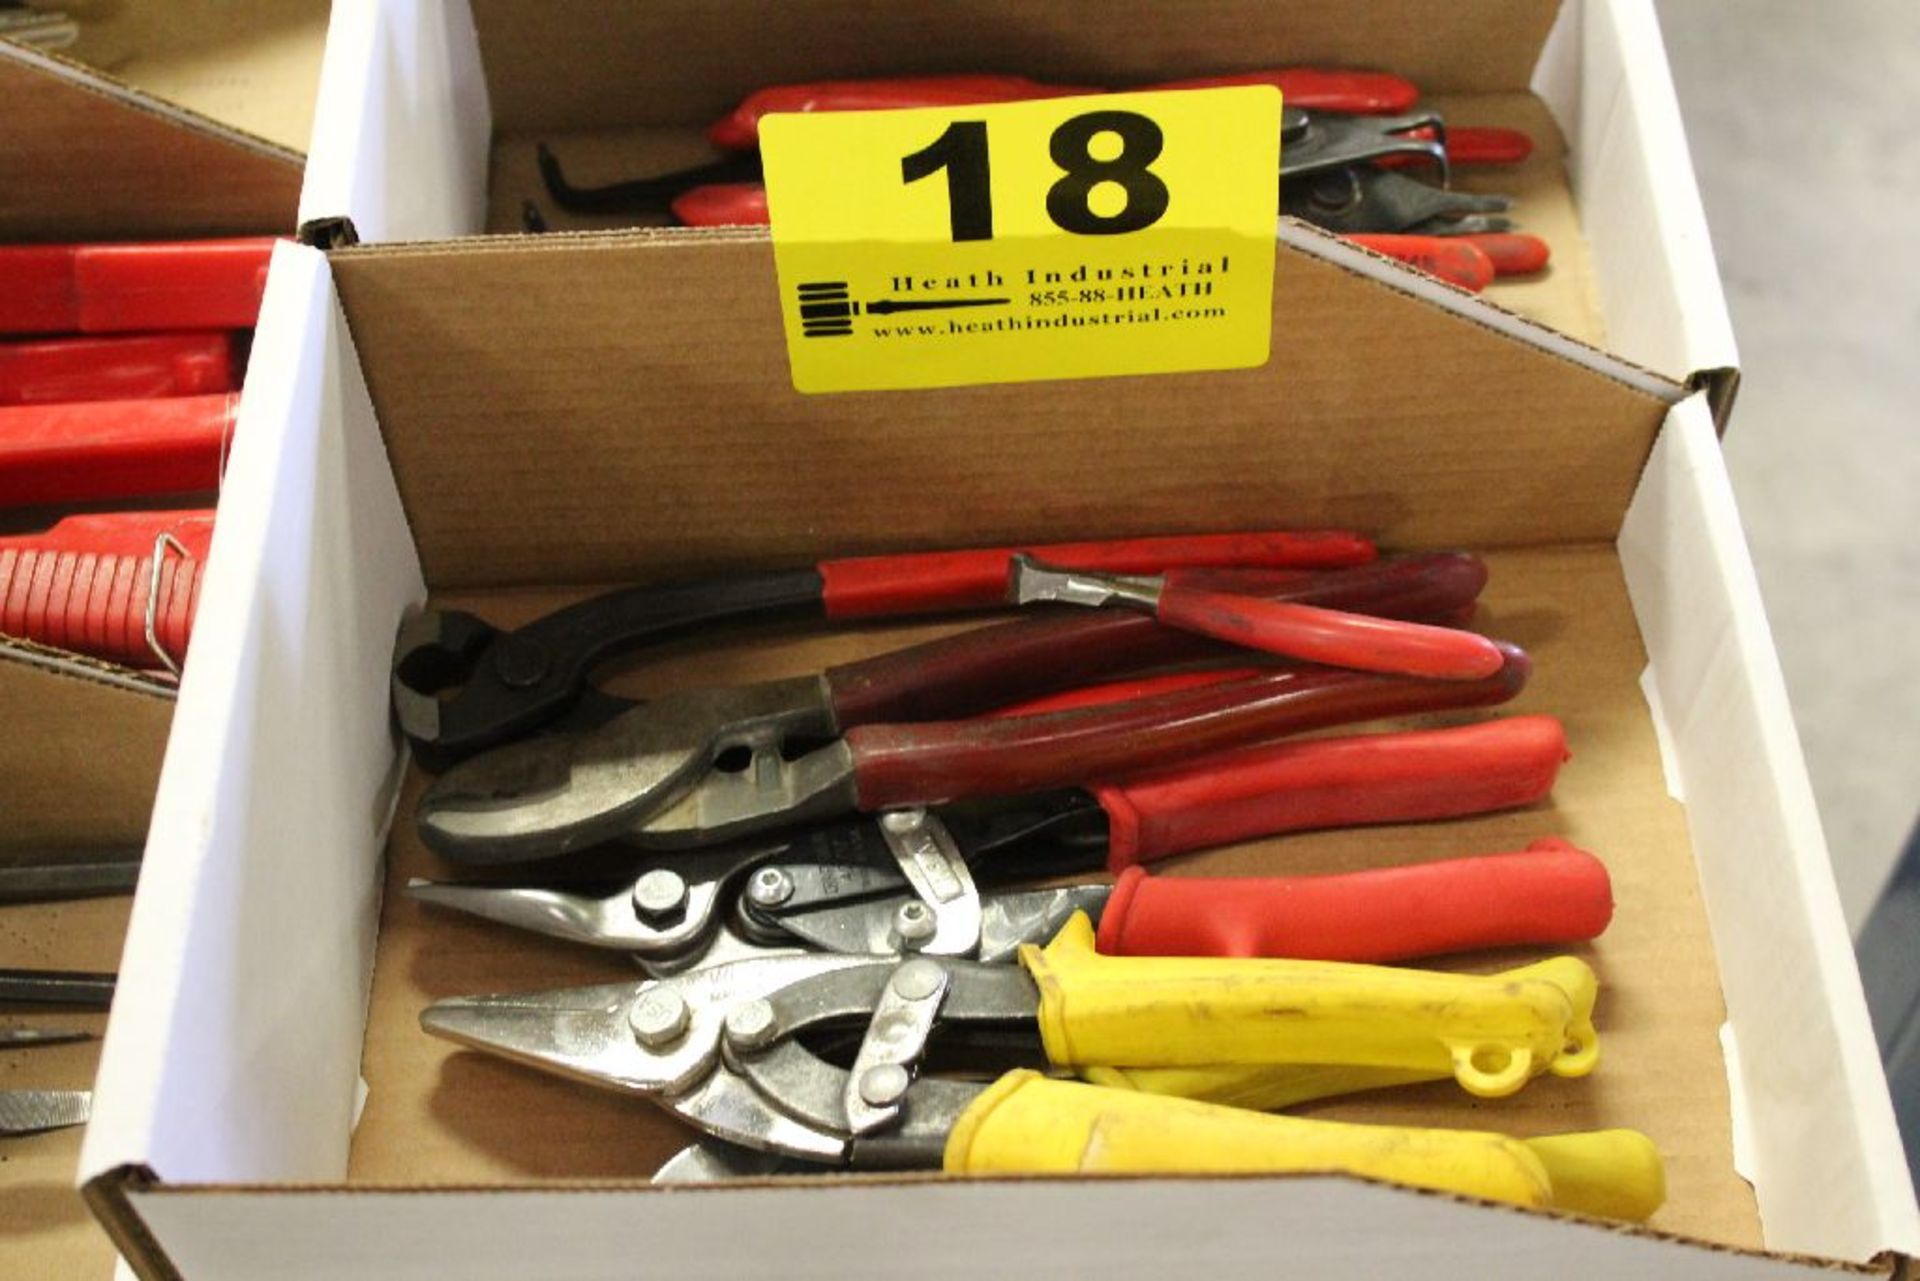 WIRECUTTERS AND METAL SNIPS IN BOX